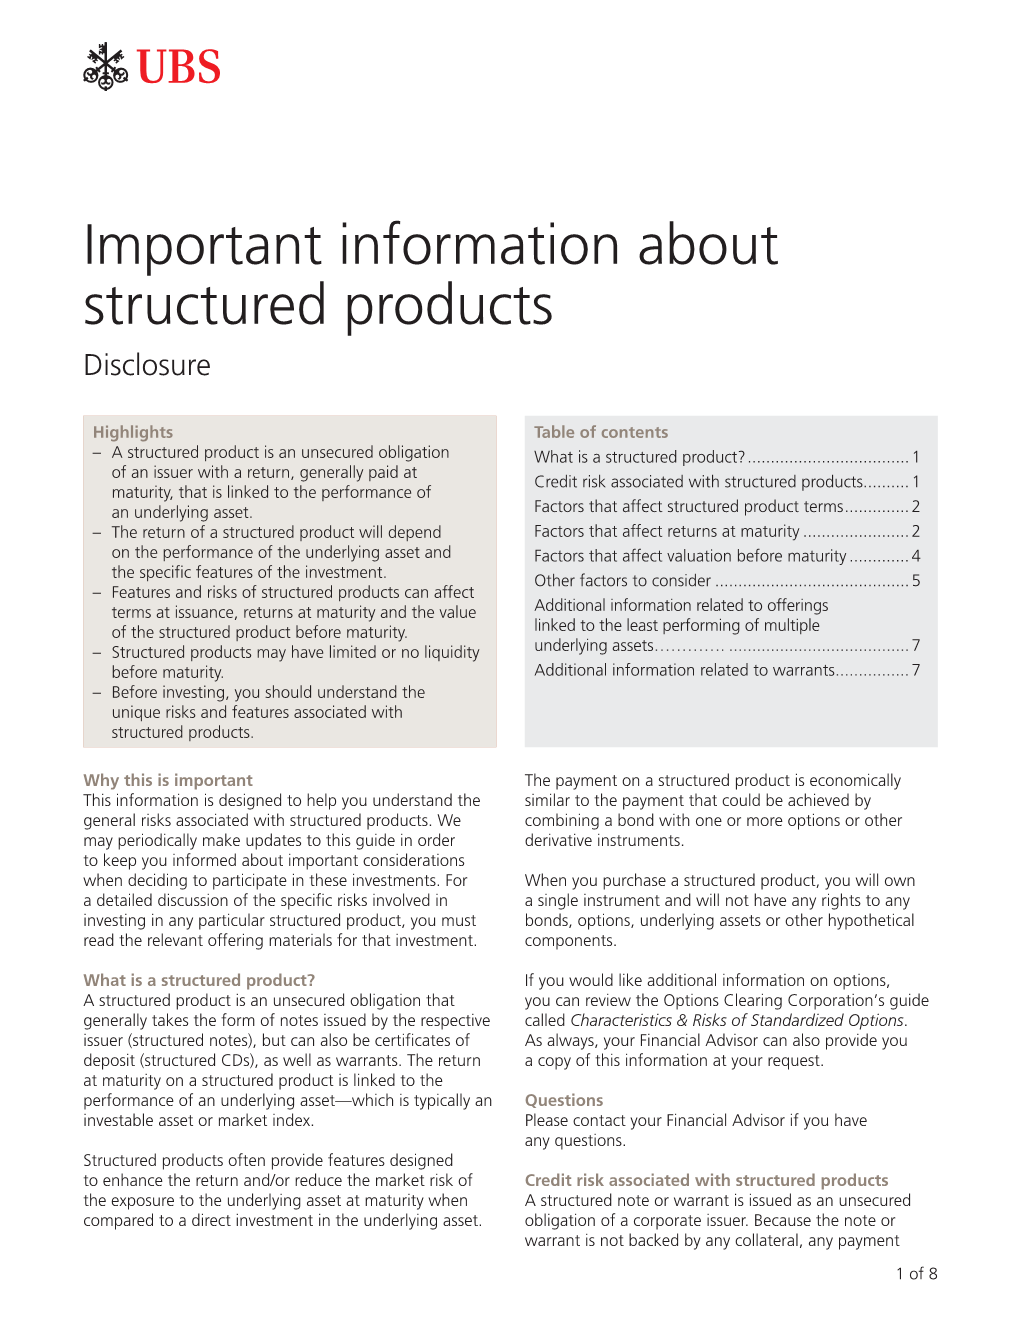 Important Information About Structured Products Disclosure